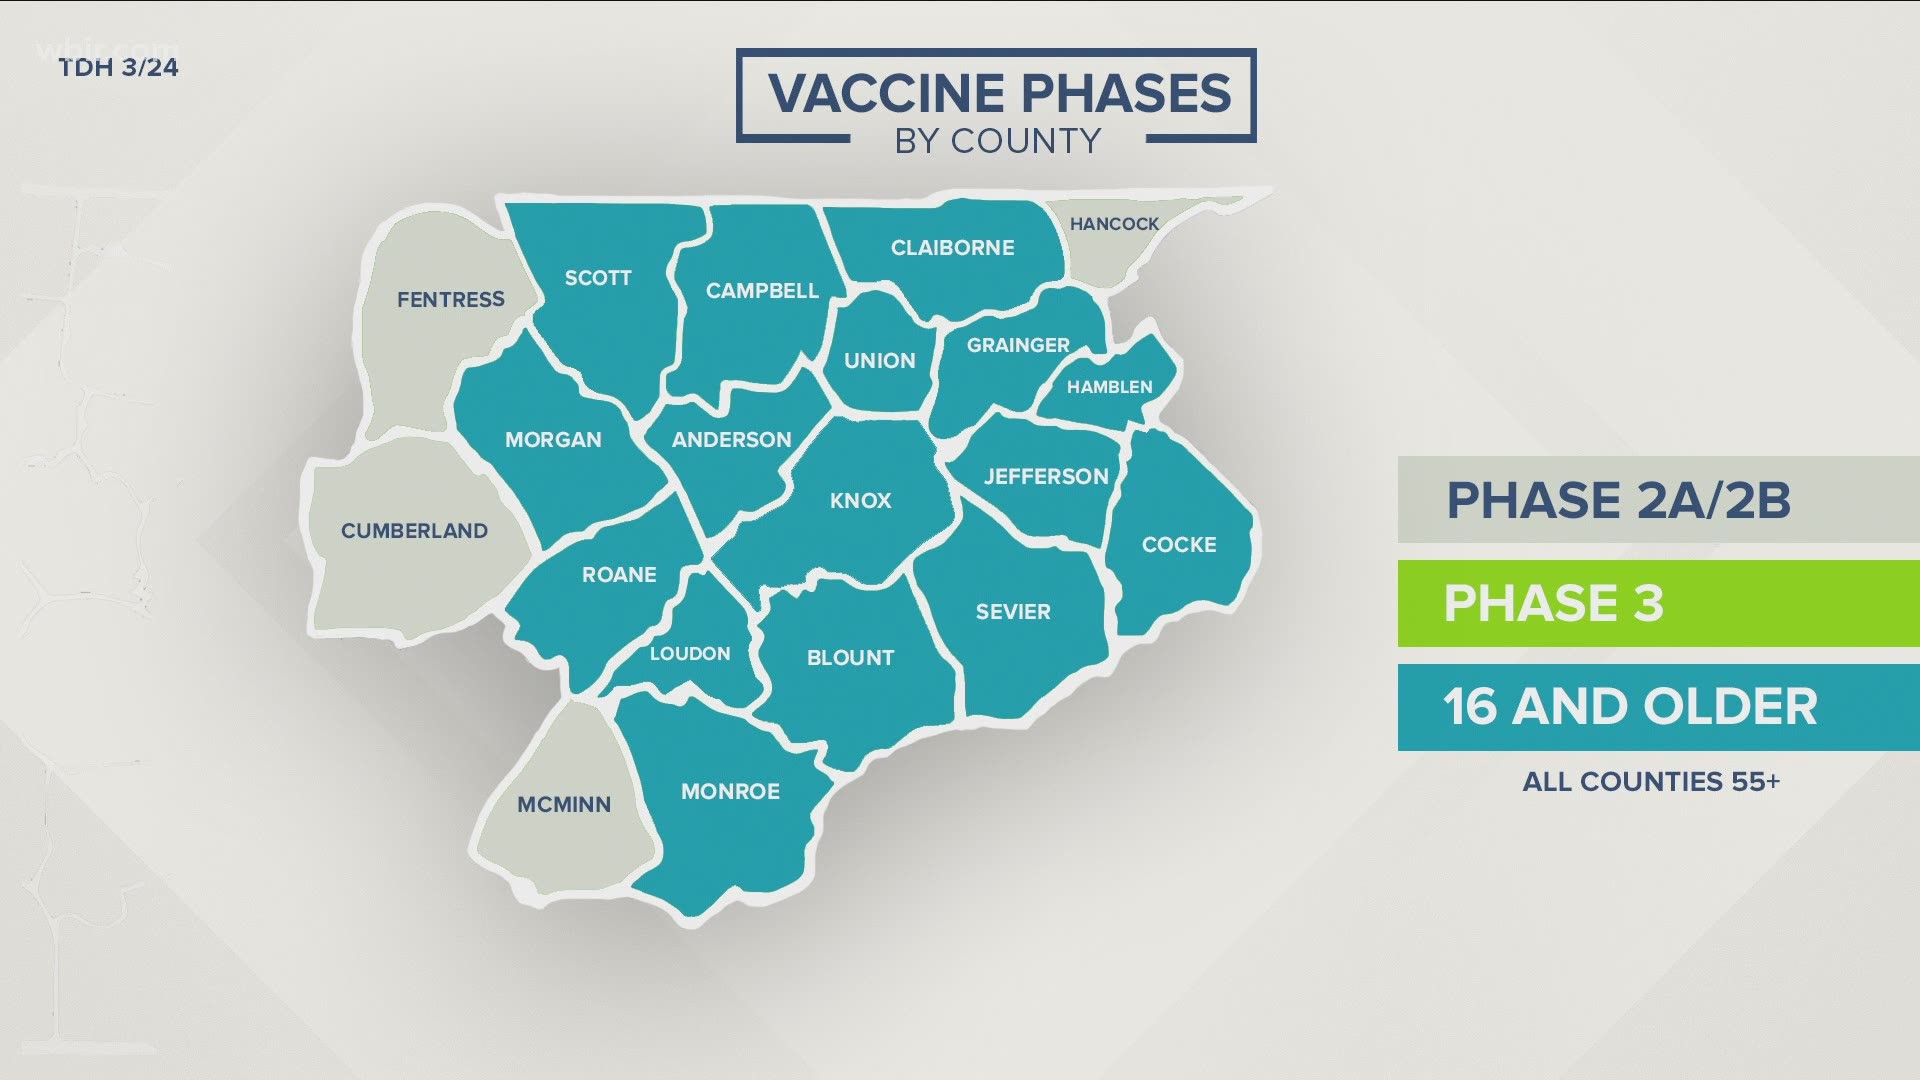 Right now, anyone over the age of 16 can get a COVID-19 vaccine shot in Tennessee.